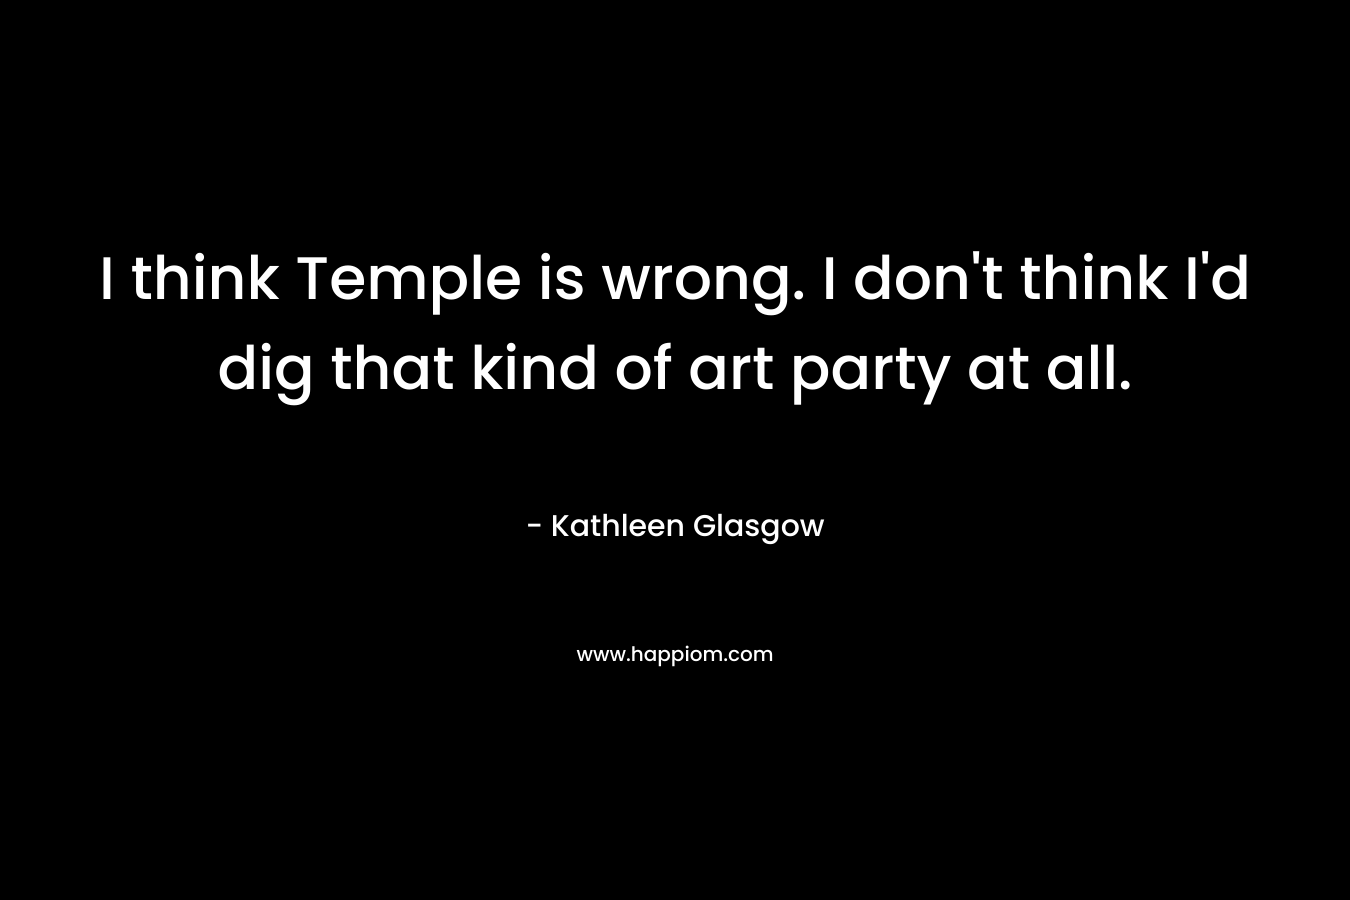 I think Temple is wrong. I don’t think I’d dig that kind of art party at all. – Kathleen Glasgow